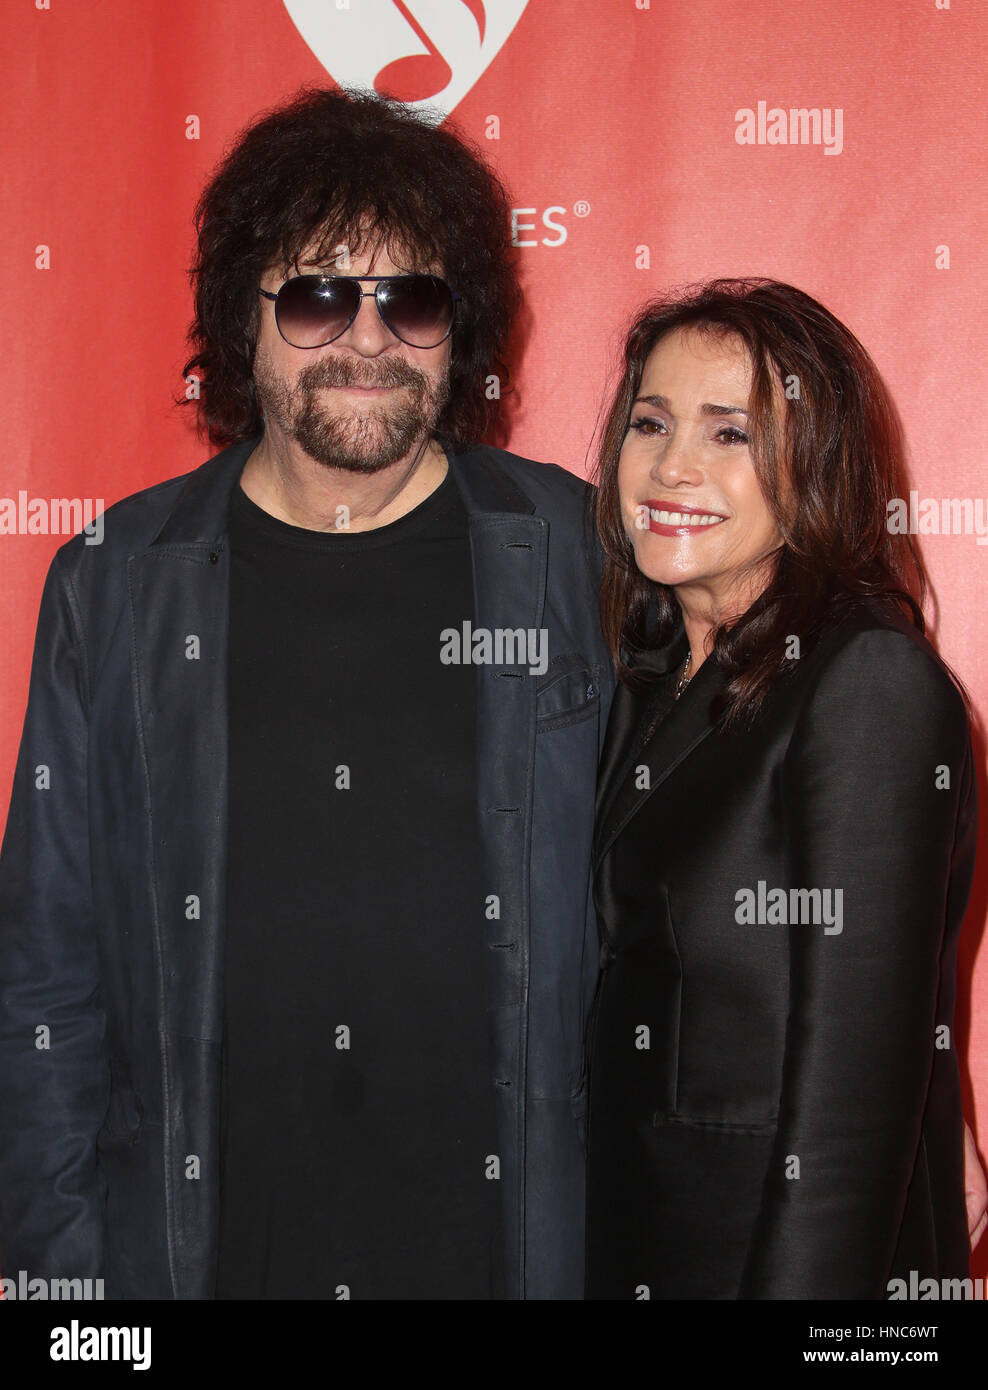 Los Angeles, CA, USA. 10th Feb, 2017. Jeff Lynne, Sani Kapelson Lynne, At 59th GRAMMY Awards - MusiCares Person of the Year Honoring Tom Petty, At Los Angeles Convention Center In California on February 10, 2017. Stock Photo